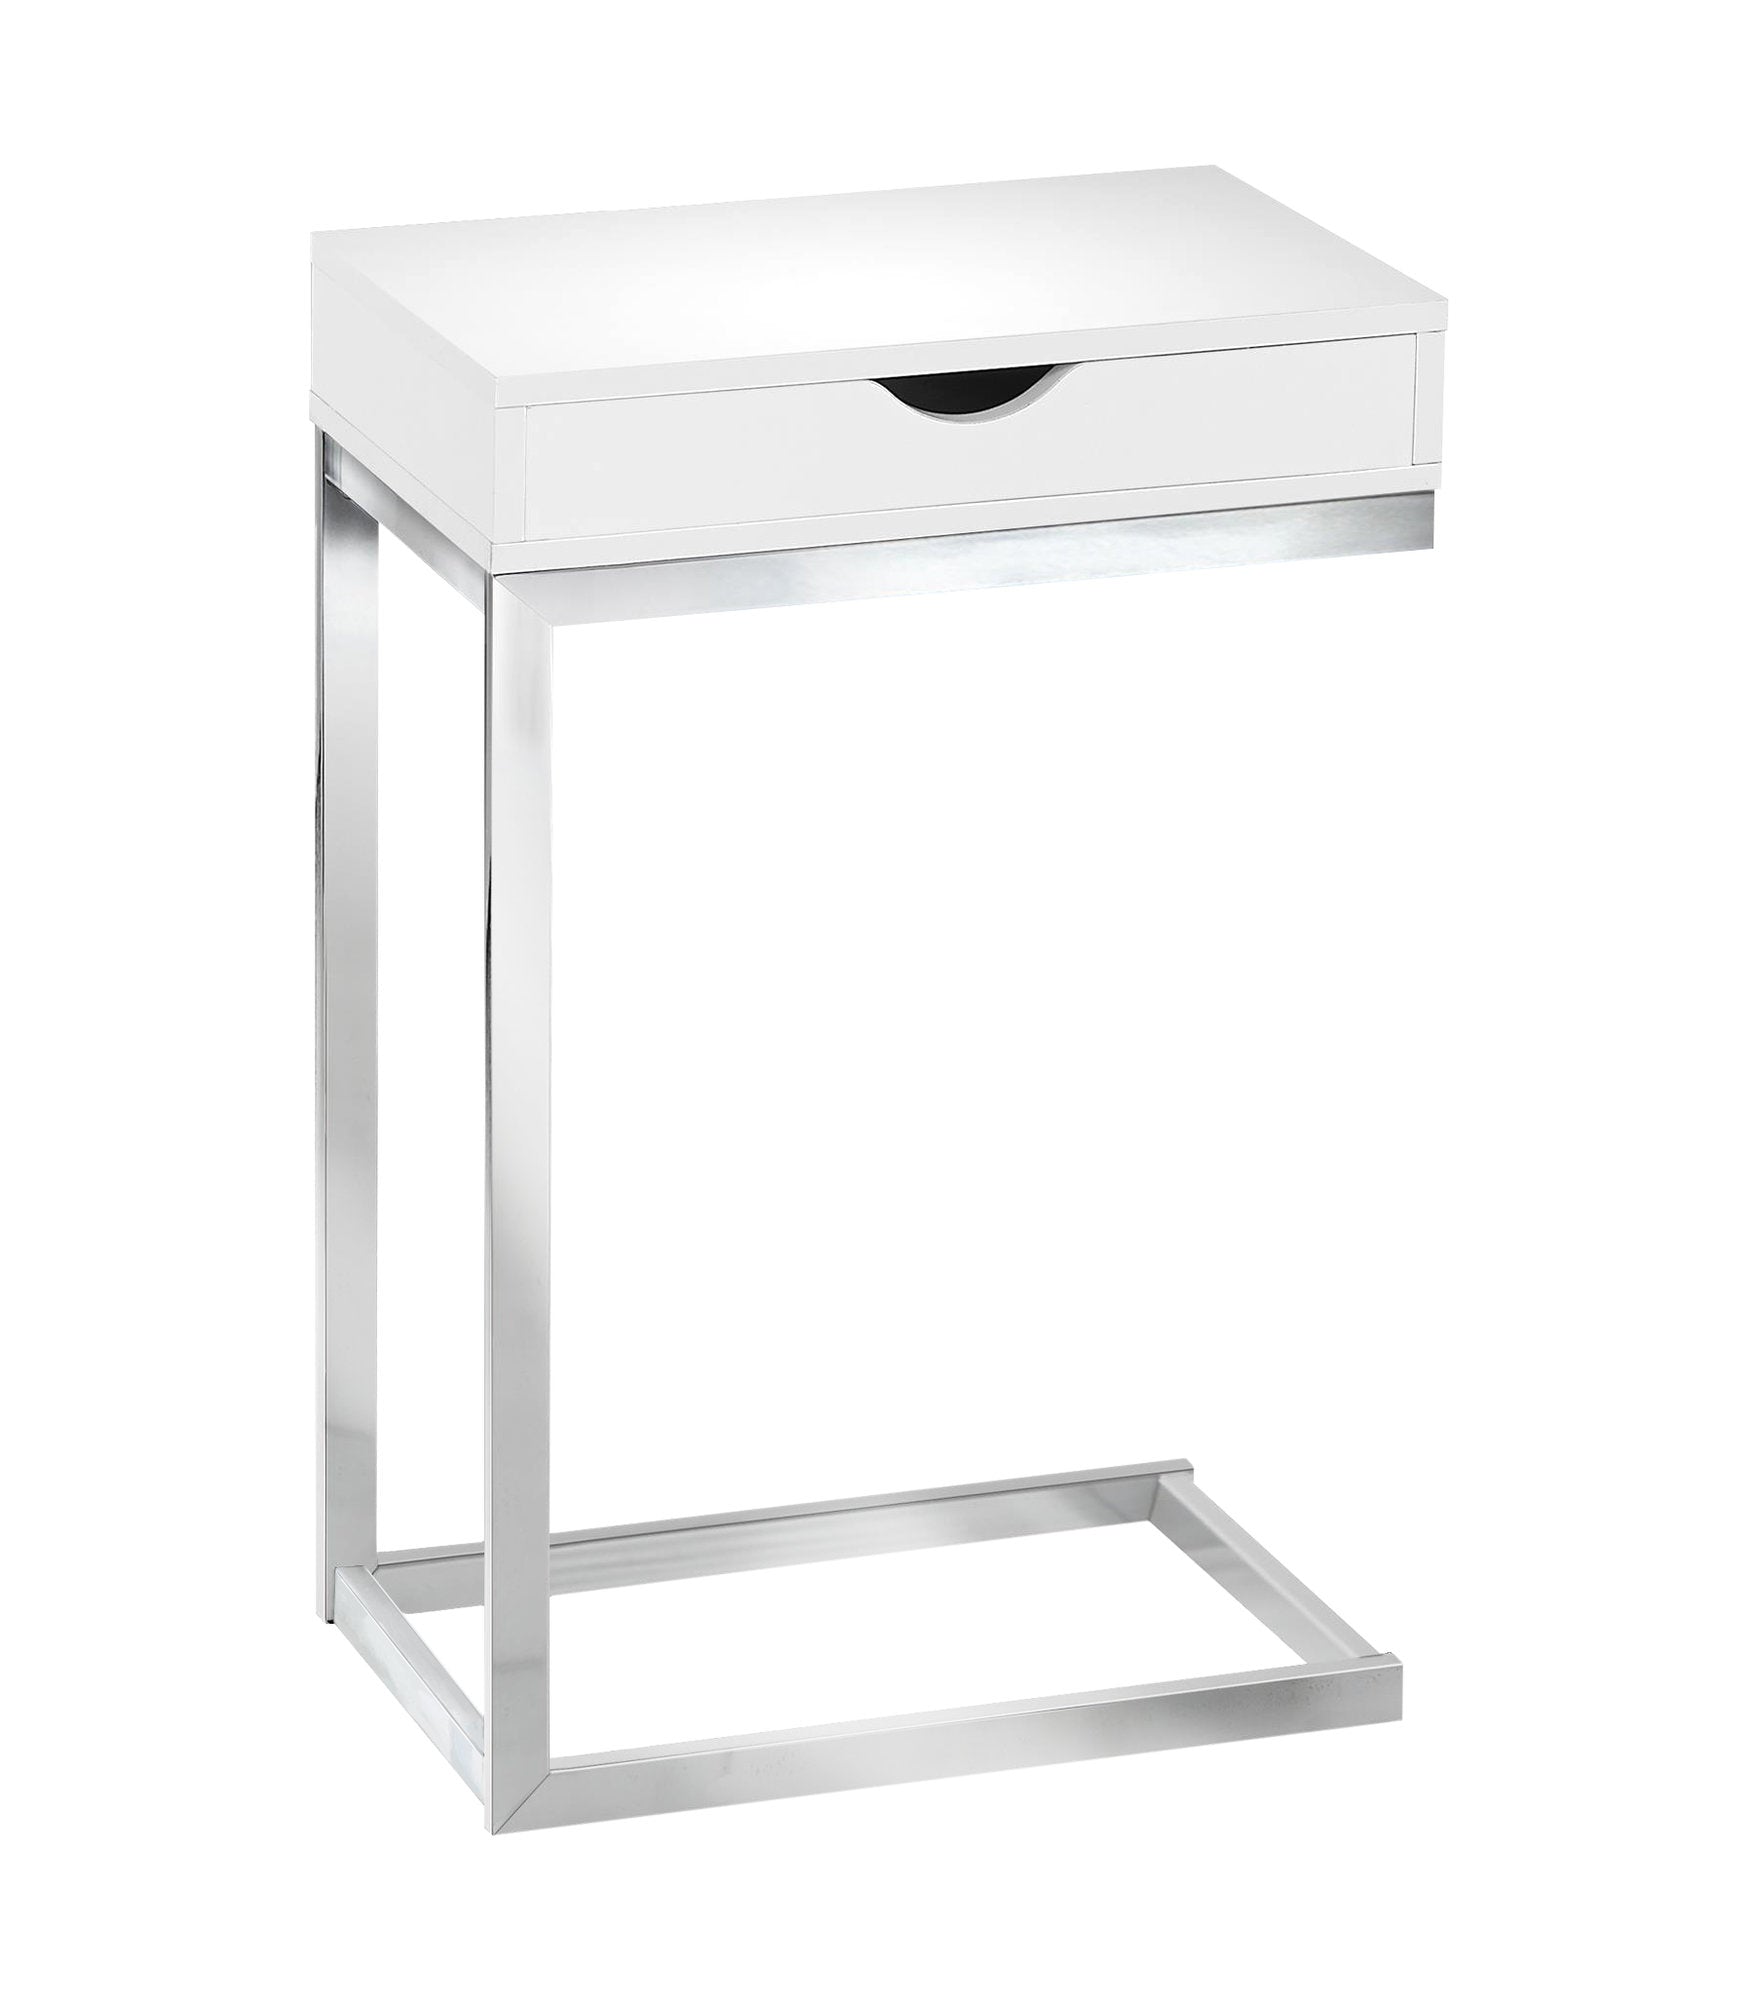 Modern C-Shaped Accent Chairside Table With Drawer in Glossy White